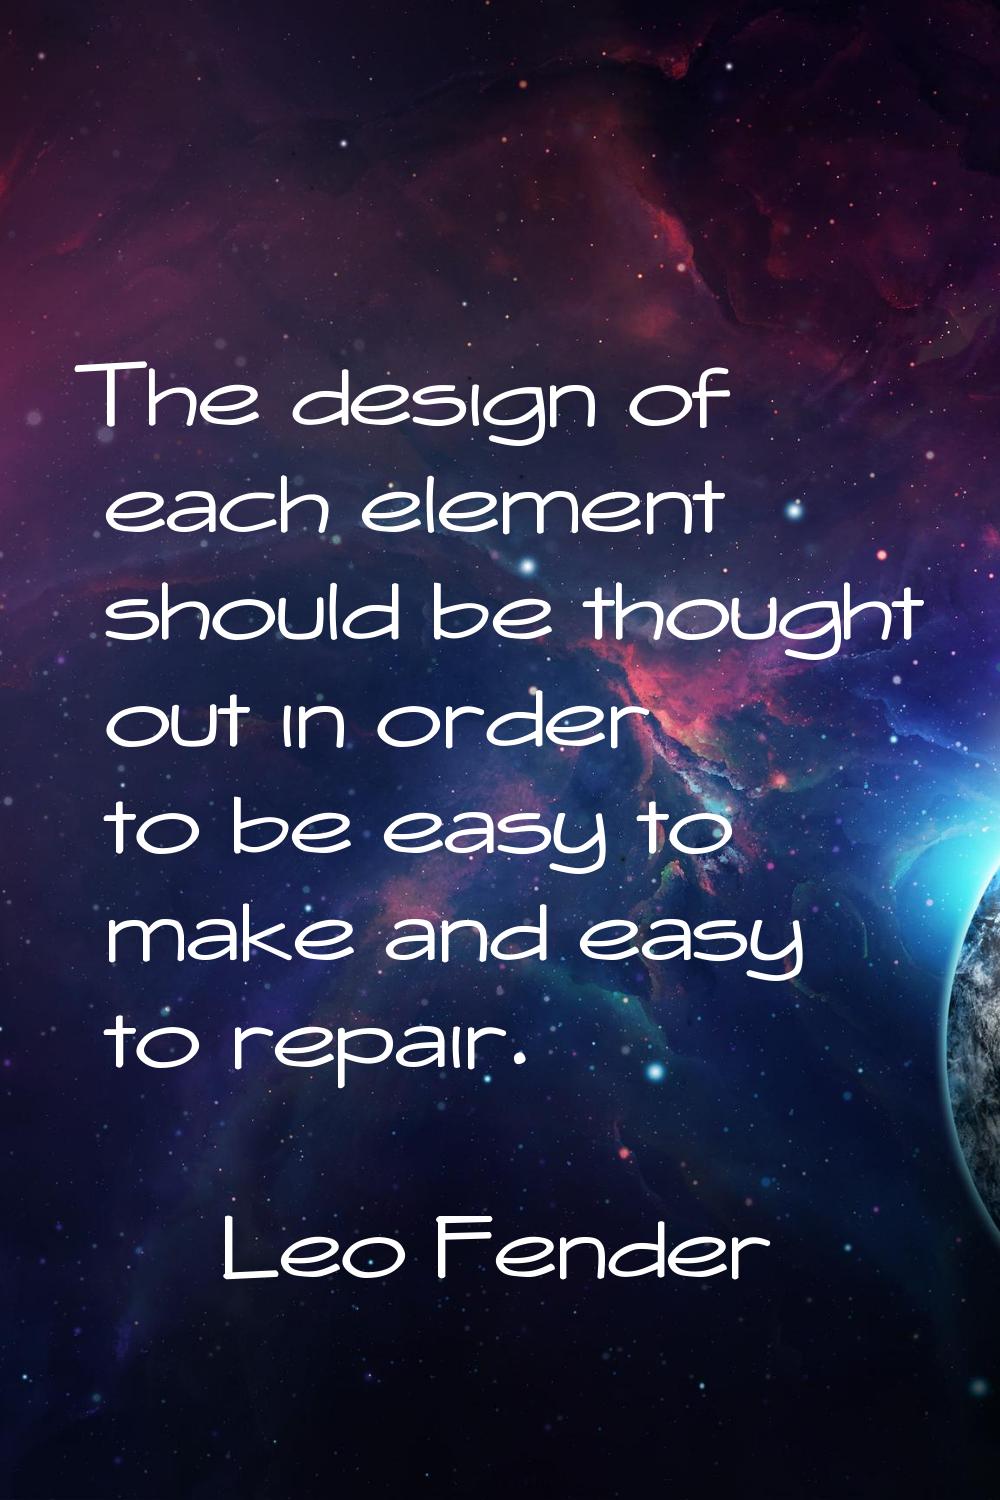 The design of each element should be thought out in order to be easy to make and easy to repair.